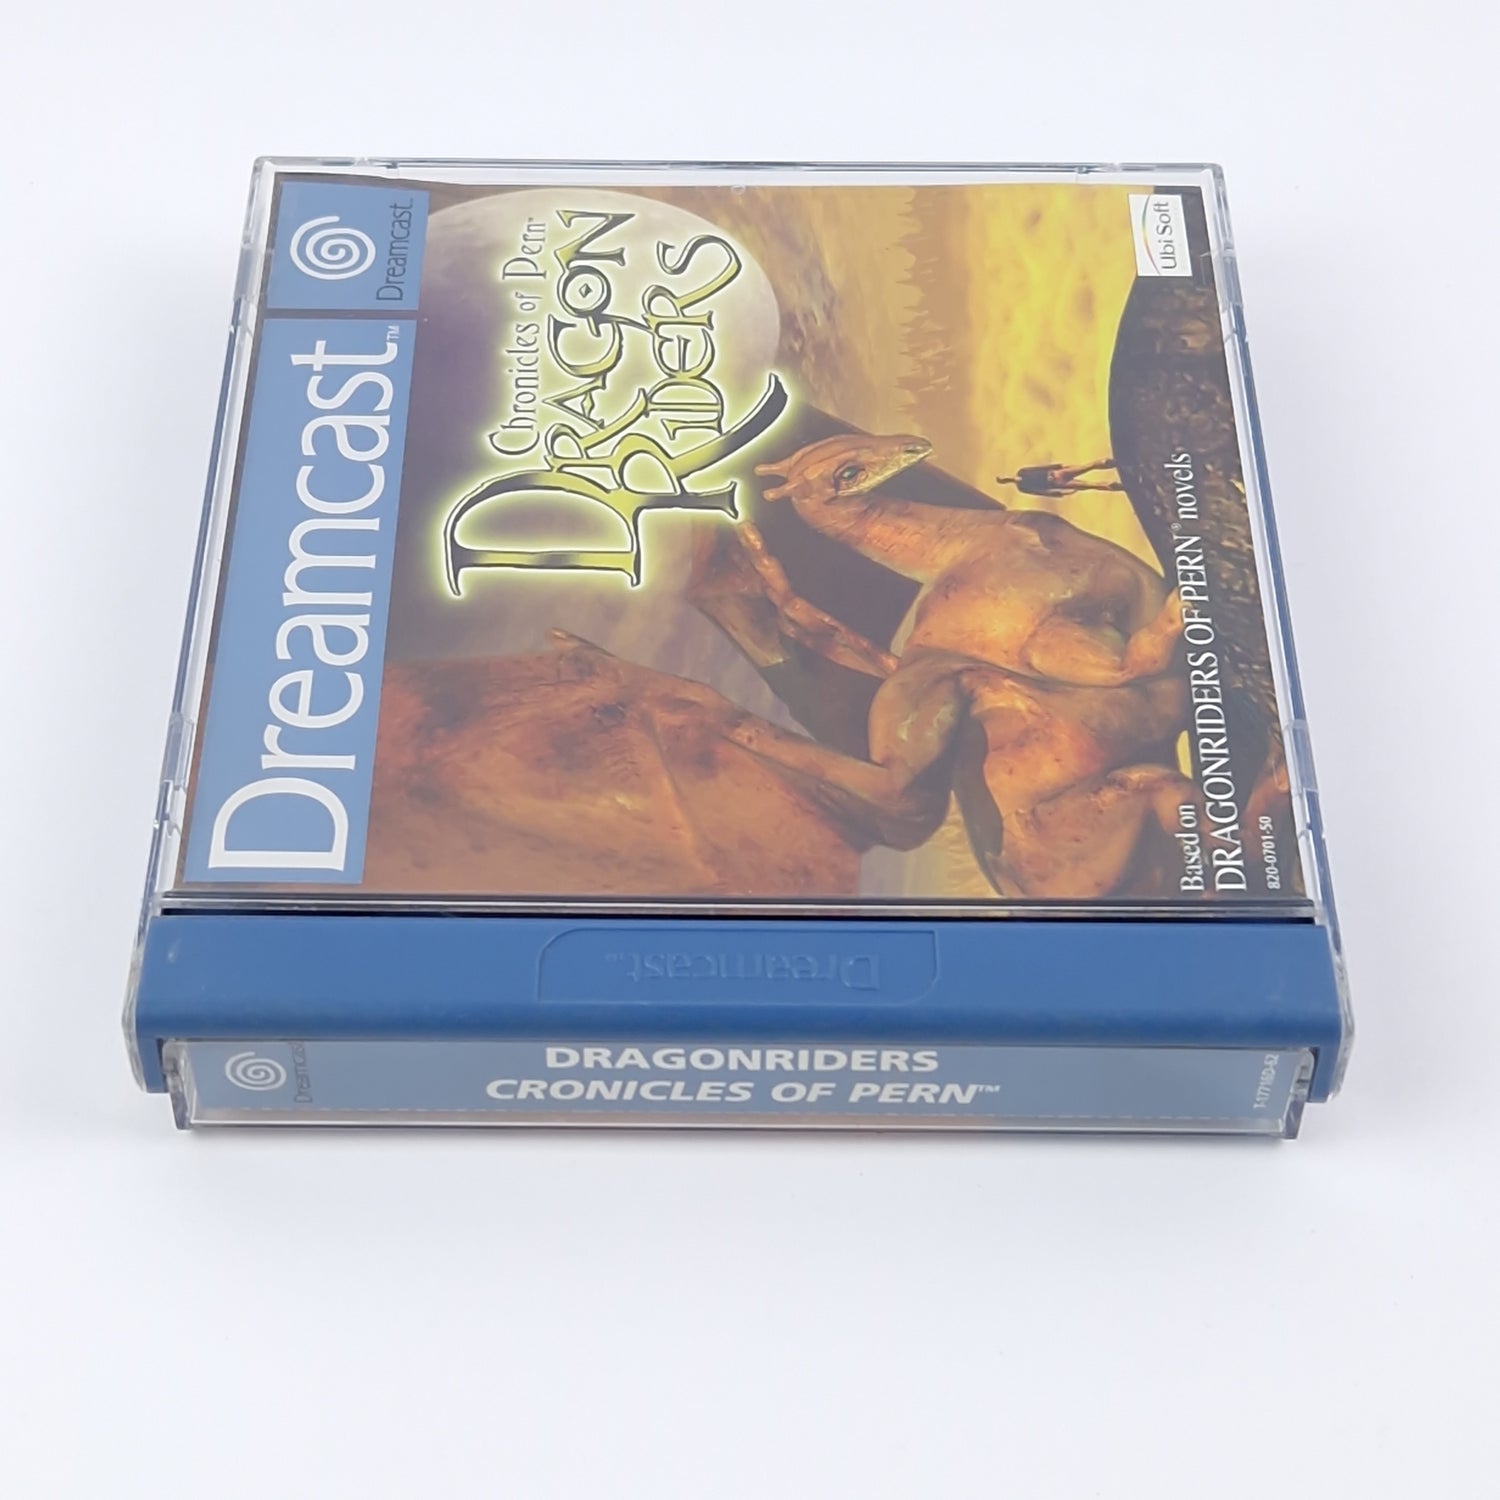 Sega Dreamcast Game: Chronicles of Pern Dragon Riders - OVP Instructions CD PAL